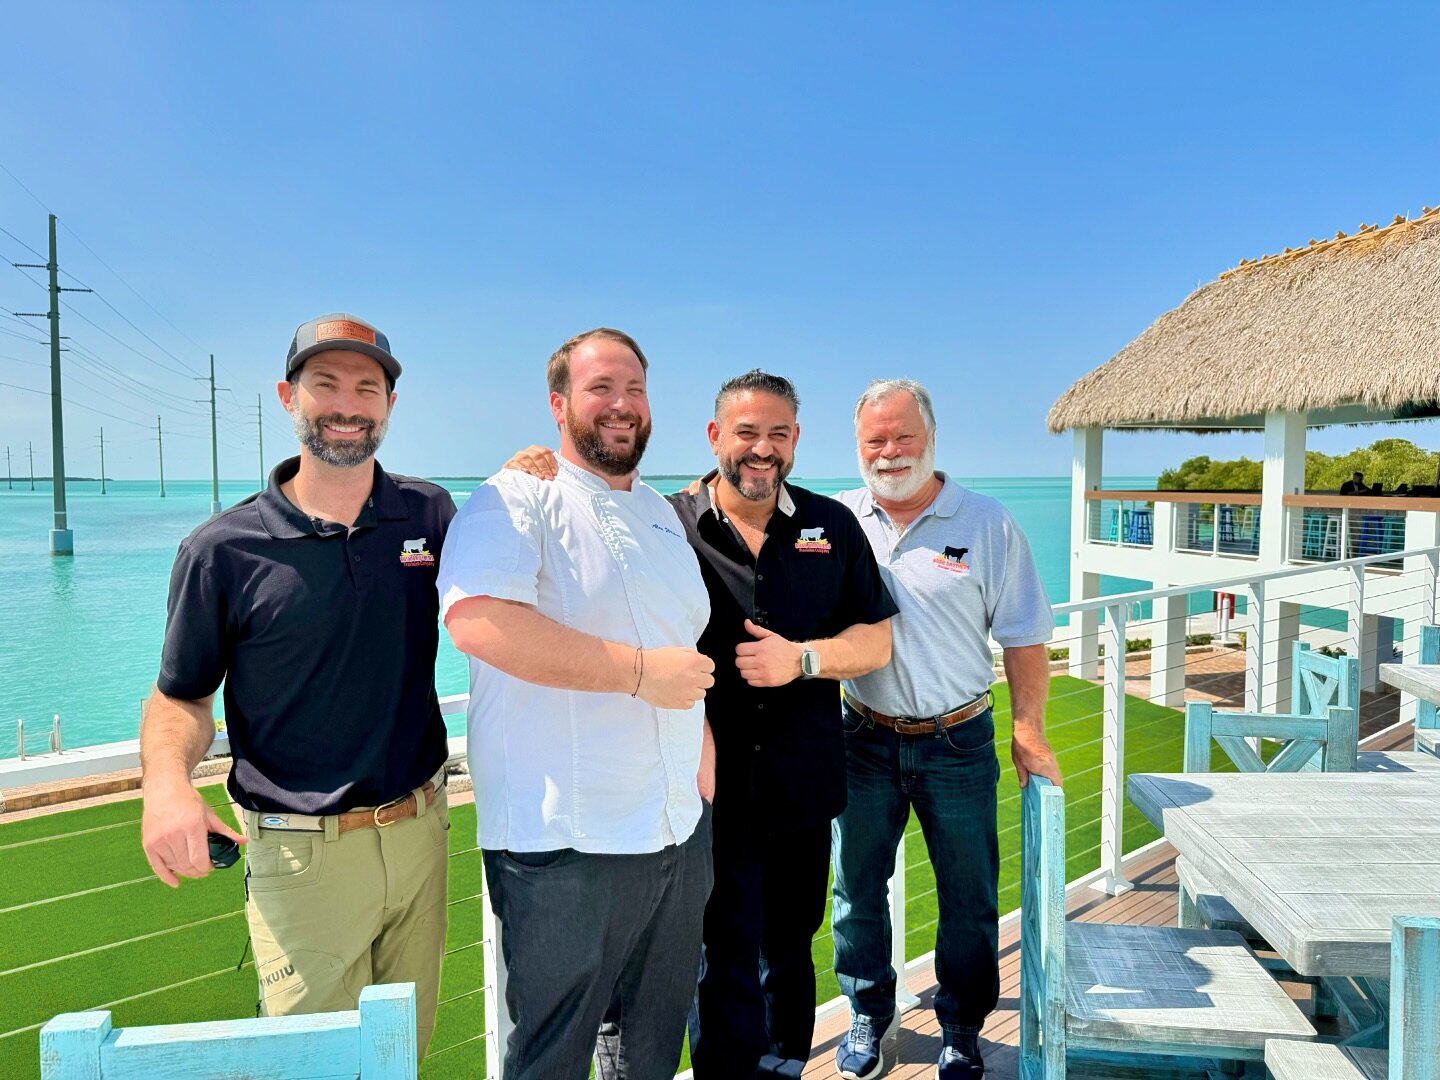 Training is in session! 🥩

Staff training by @bushel9, Billy and @chefish1 with @alan_wilks at @papajoeswaterfront - opening in Islamorada this week! 🌴 

Good luck &amp; congratulations! Excited to be a part of this concept from the beginning, feat